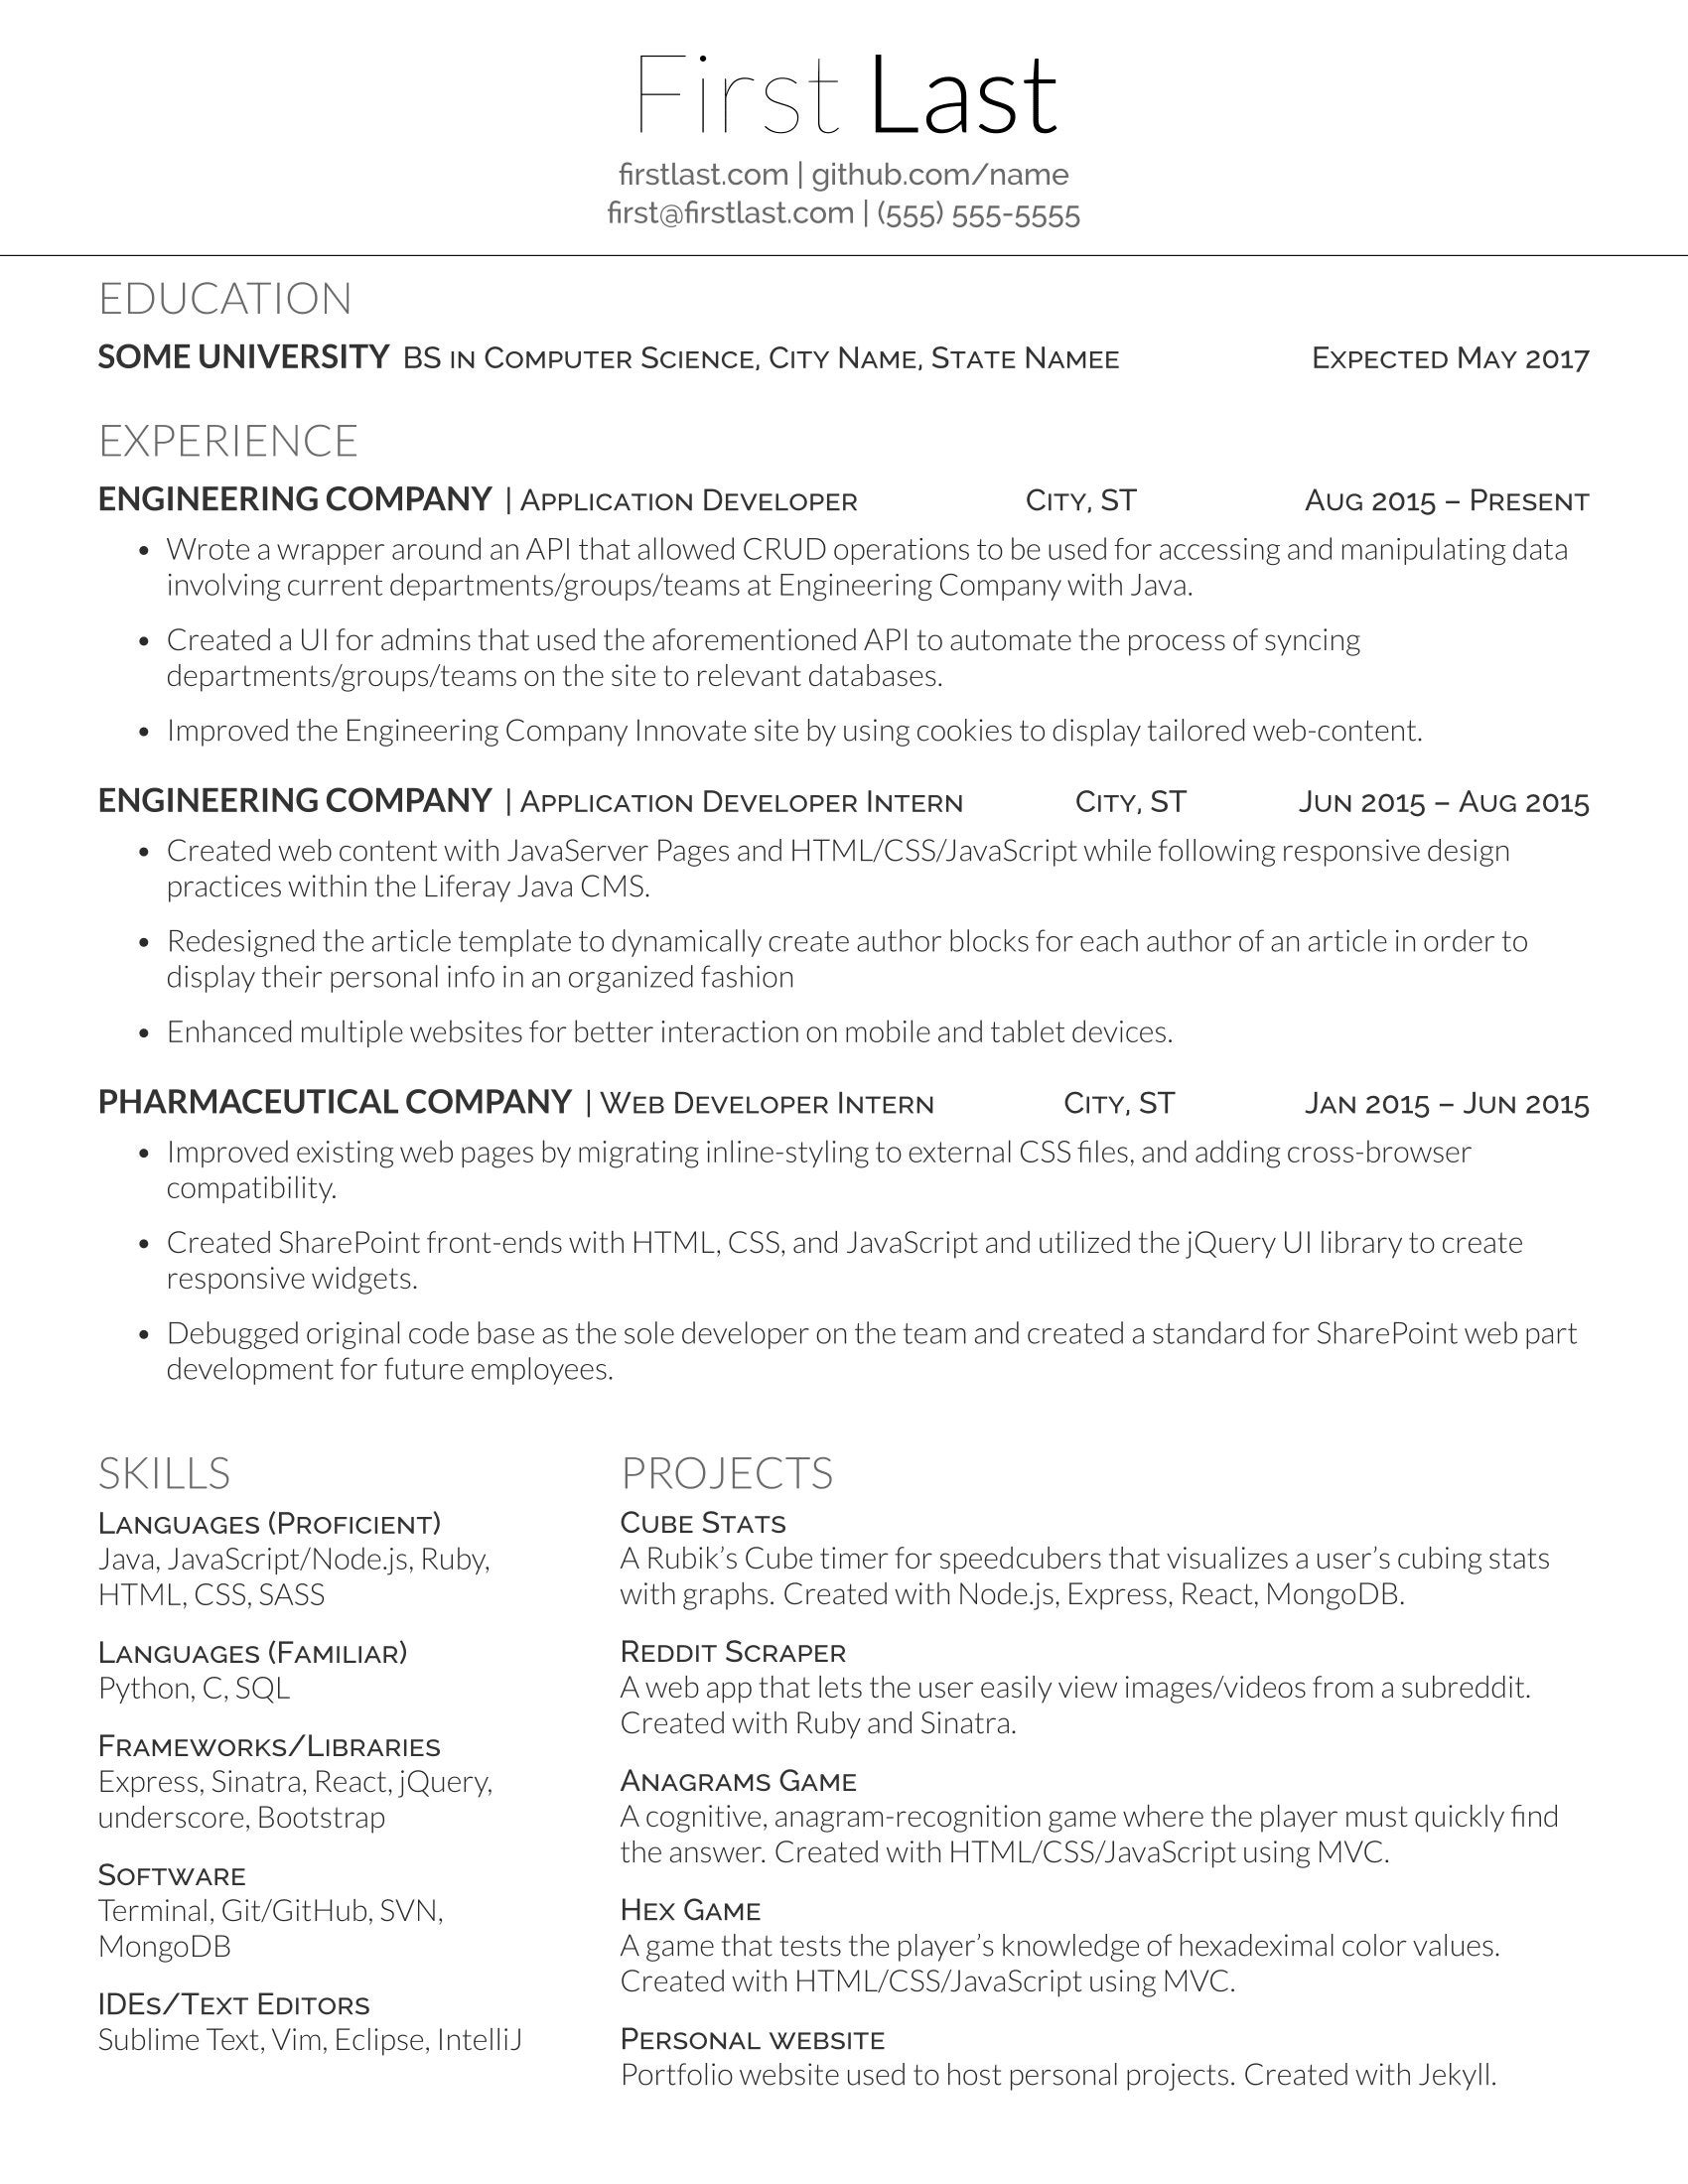 Would you consider this to be a bad resume format ...